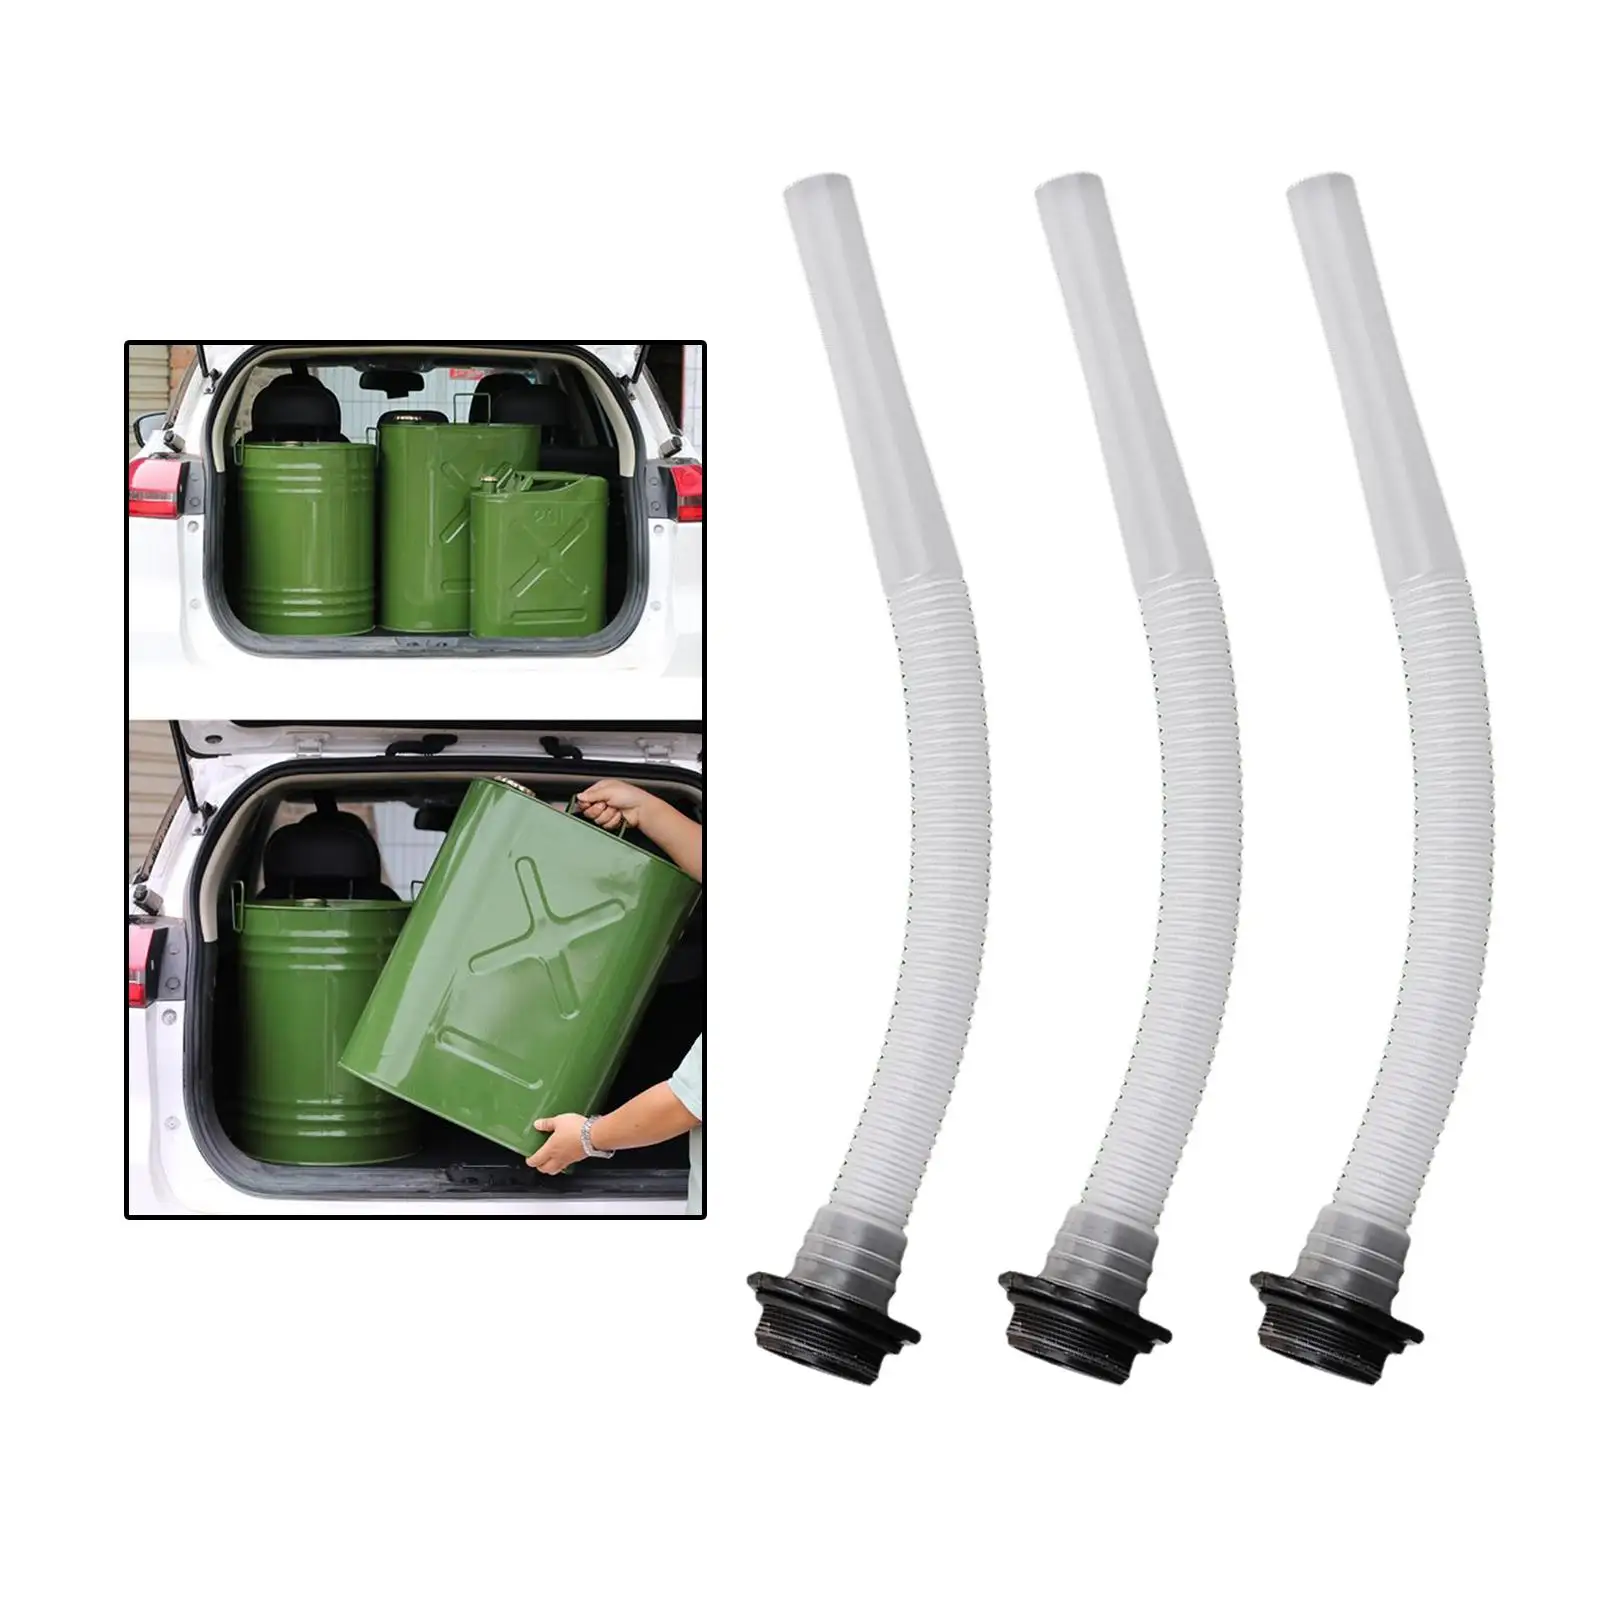 3Pcs 34cm Length Fuel Tank Pouring Nozzle Replacement Nozzles Canister Motorcycle Accessories Sealing Petrol Cans Flexible Tube